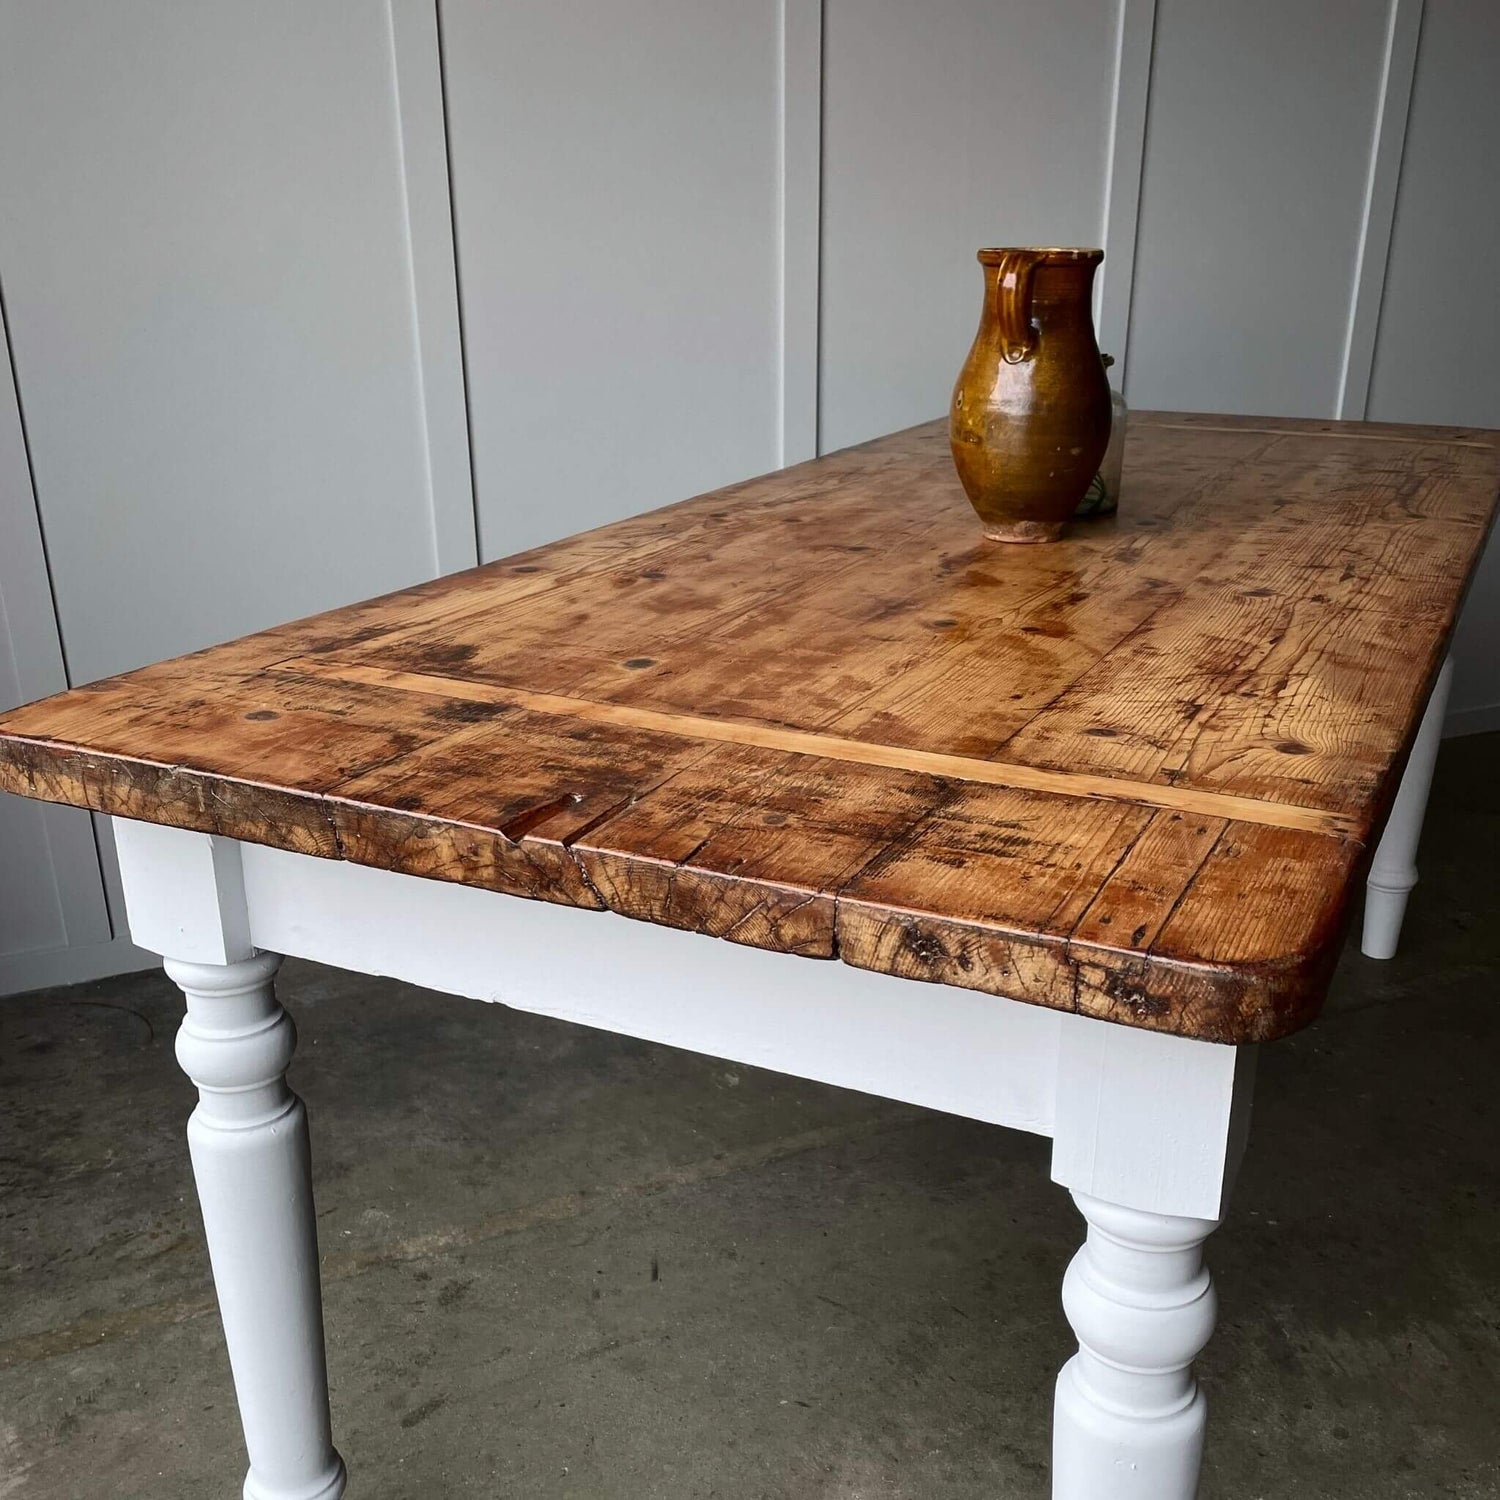 End view of country house dining table